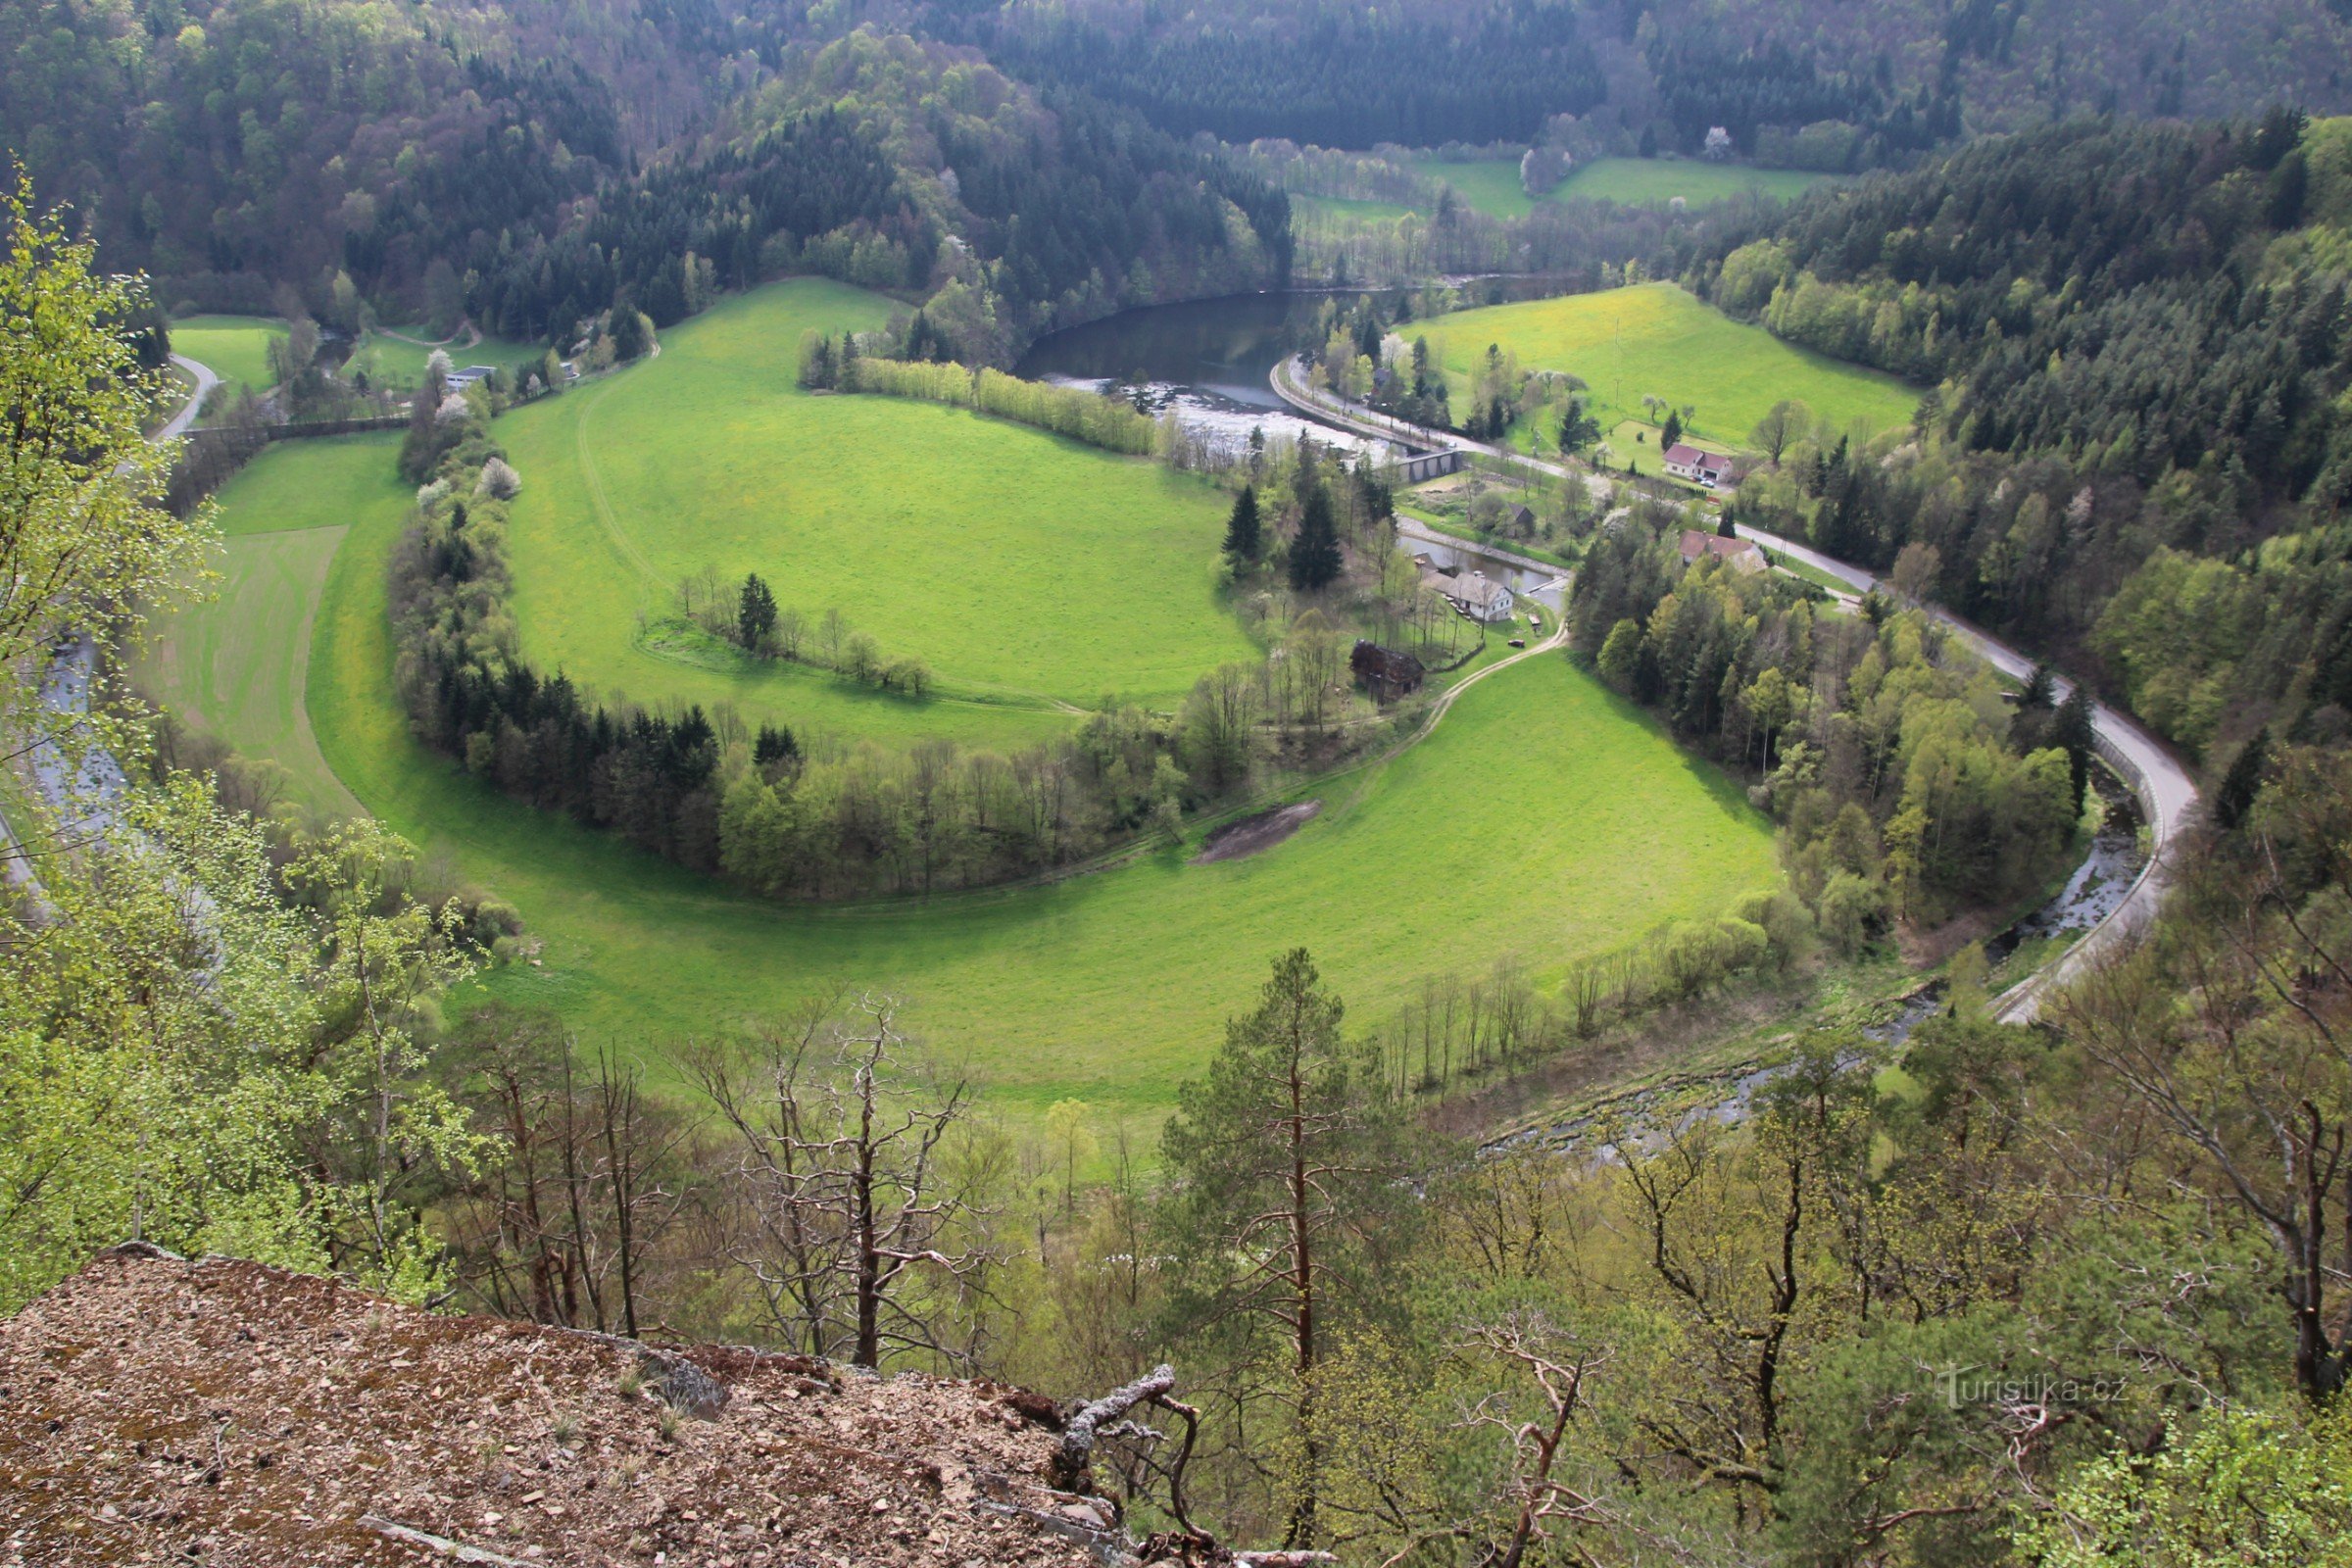 A view of the valley at the wide meander of the Svratka River, through which an underground feeder passes